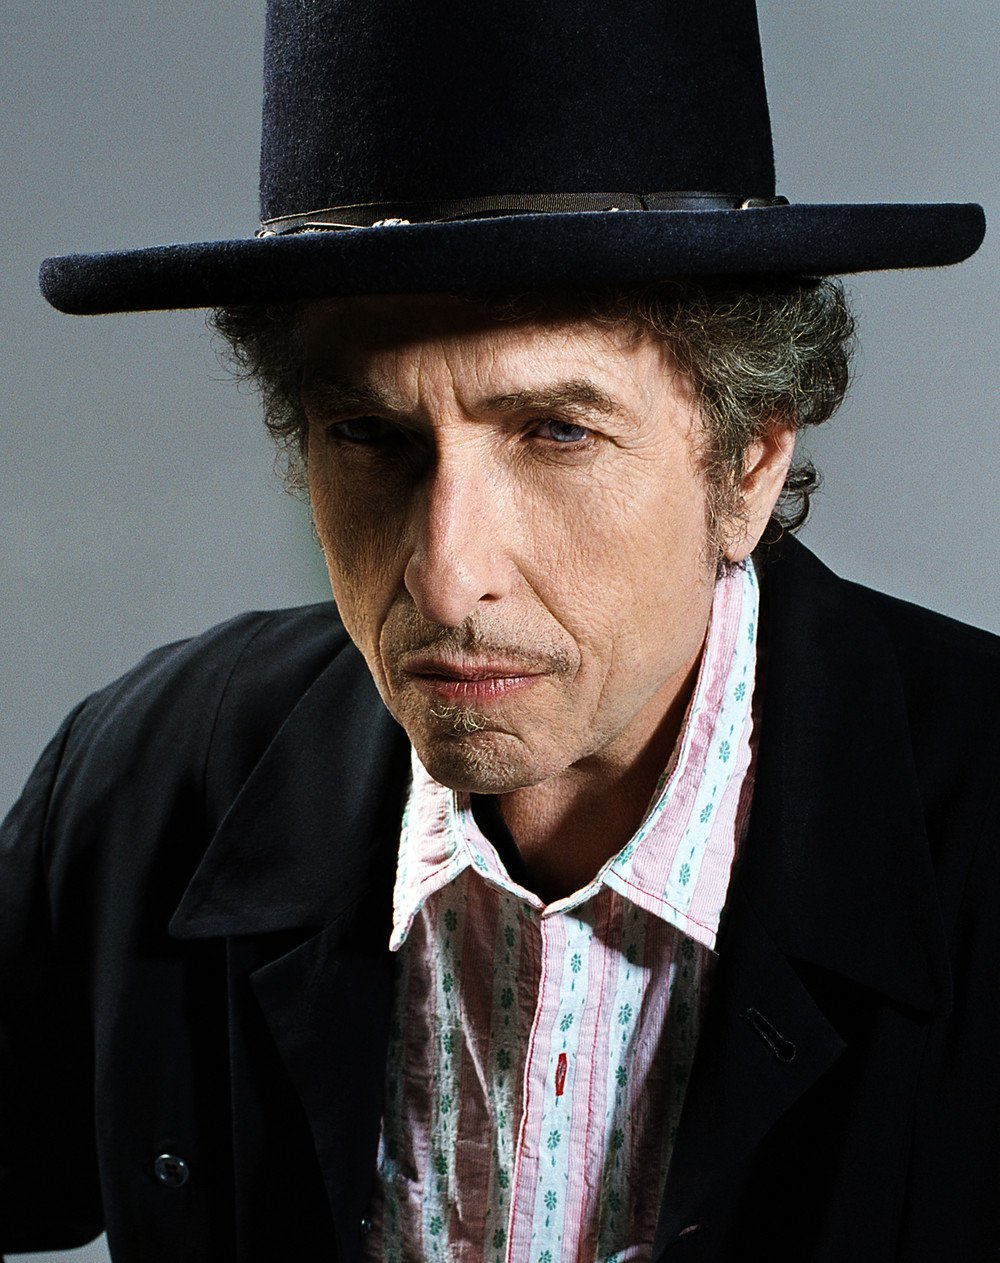 Happy birthday Bob Dylan! Born on May 24, 1941. 

May you stay forever young. 